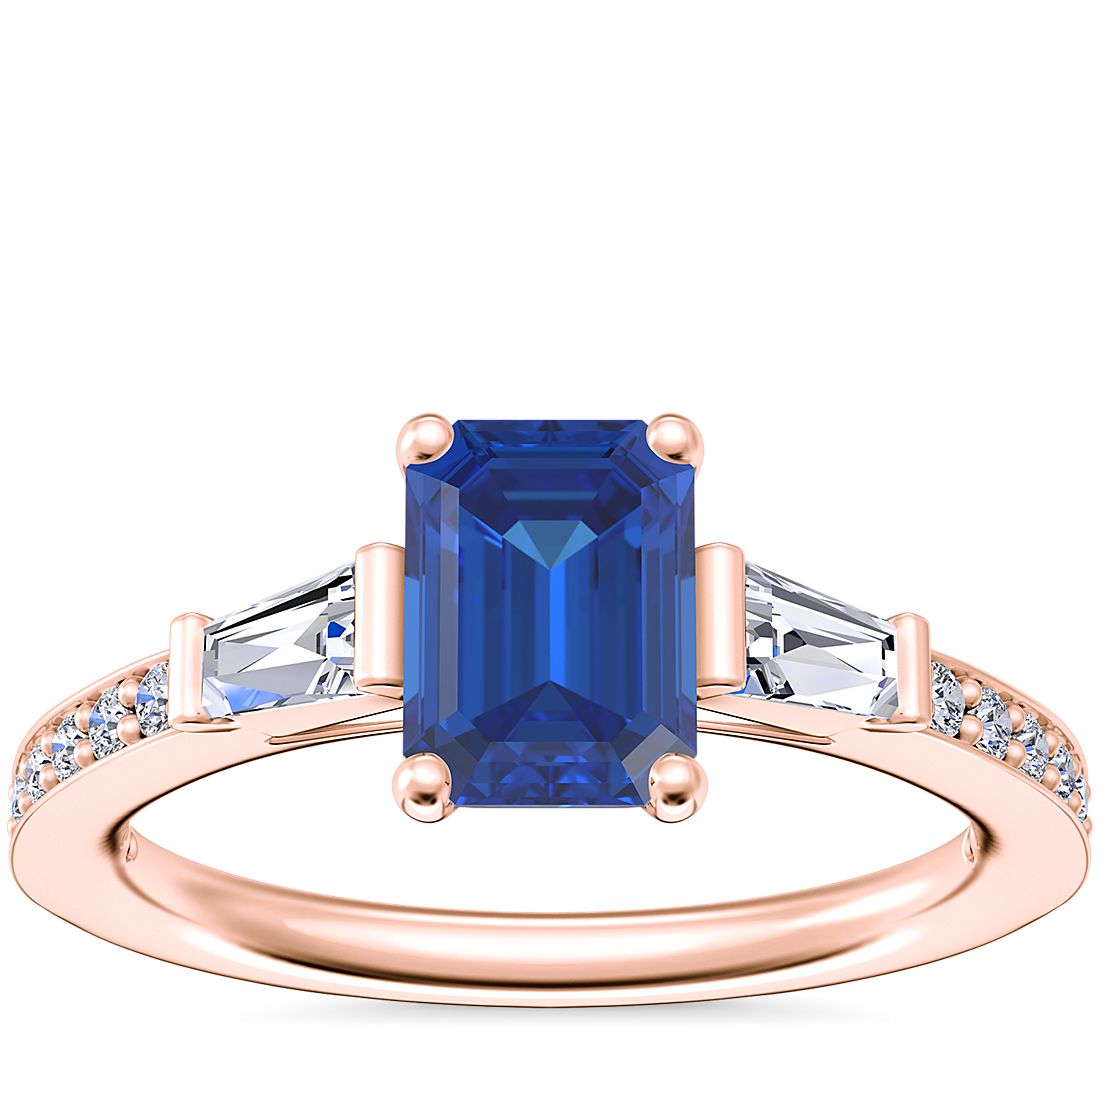 Tapered Baguette Diamond Cathedral Engagement Ring with Emerald-Cut Sapphire in 14k Rose Gold (7x5mm)